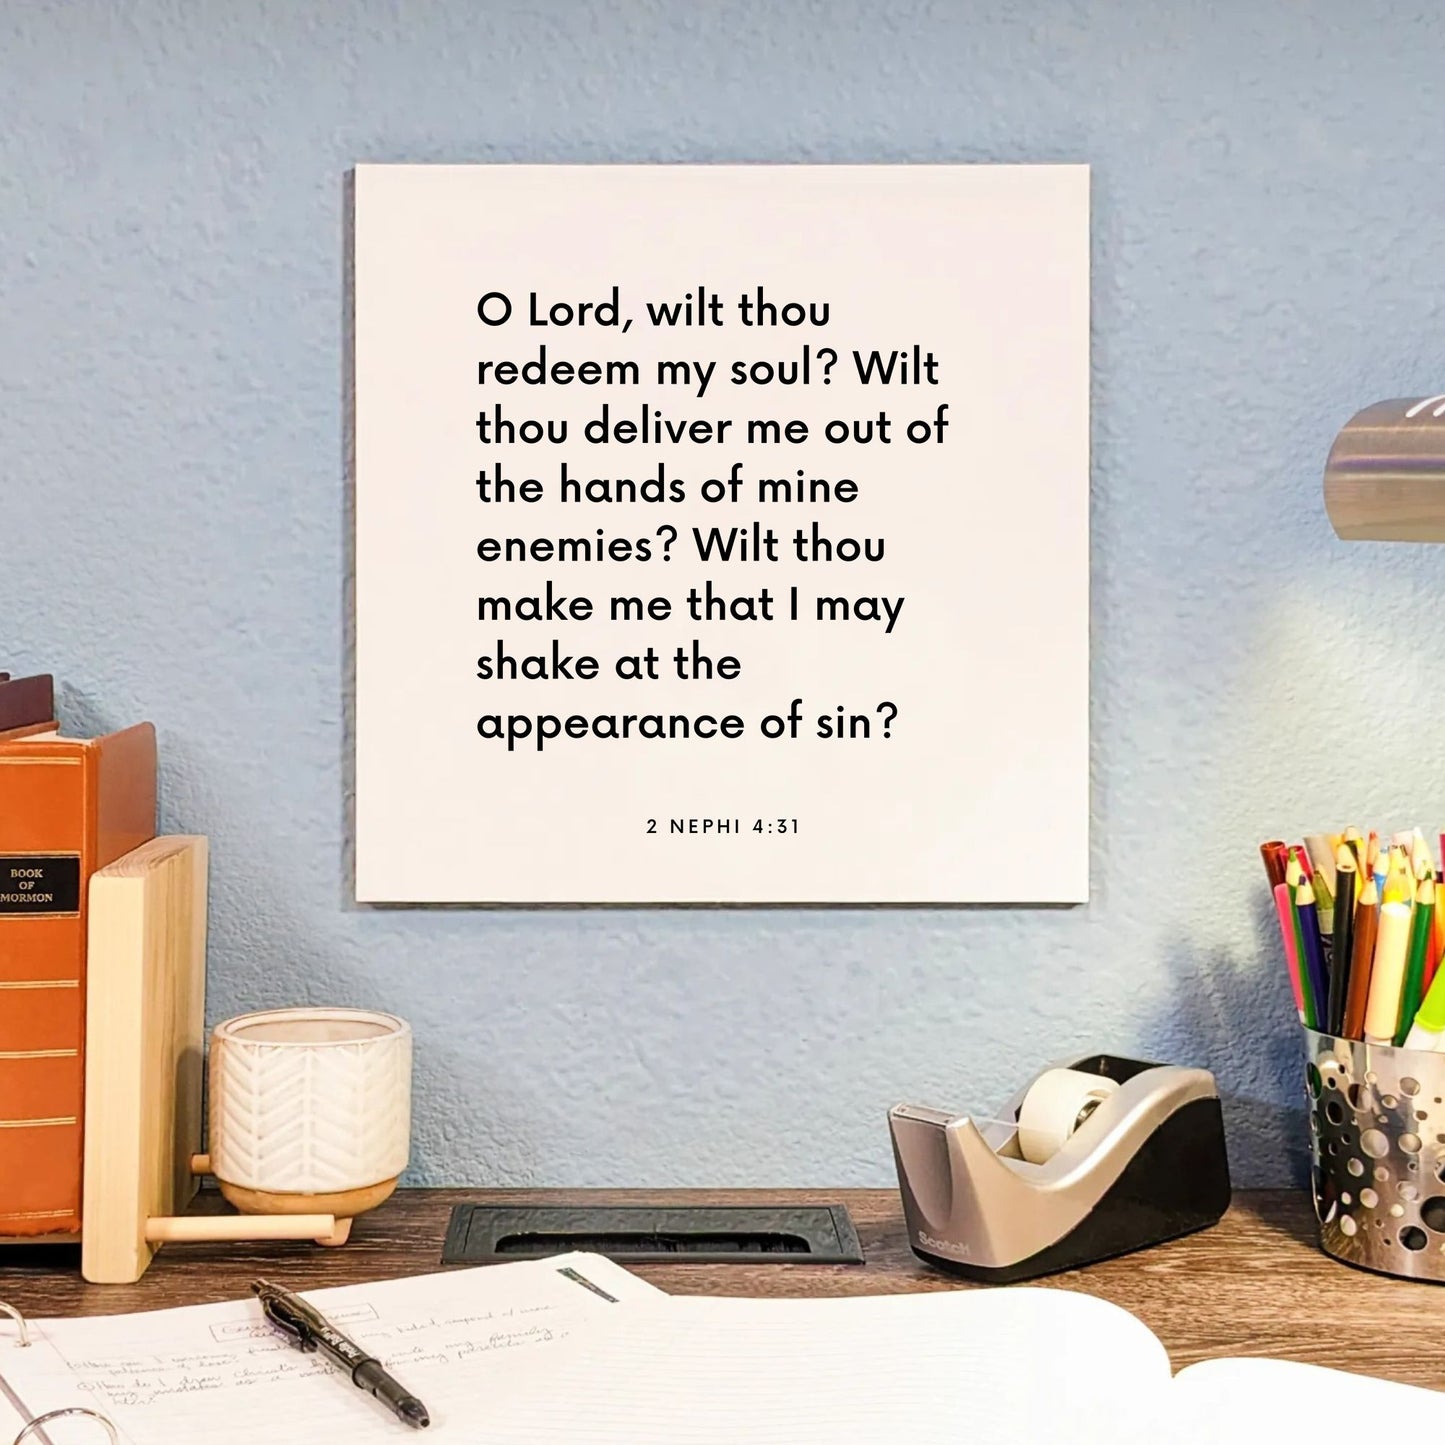 Desk mouting of the scripture tile for 2 Nephi 4:31 - "Lord, wilt thou redeem my soul?"